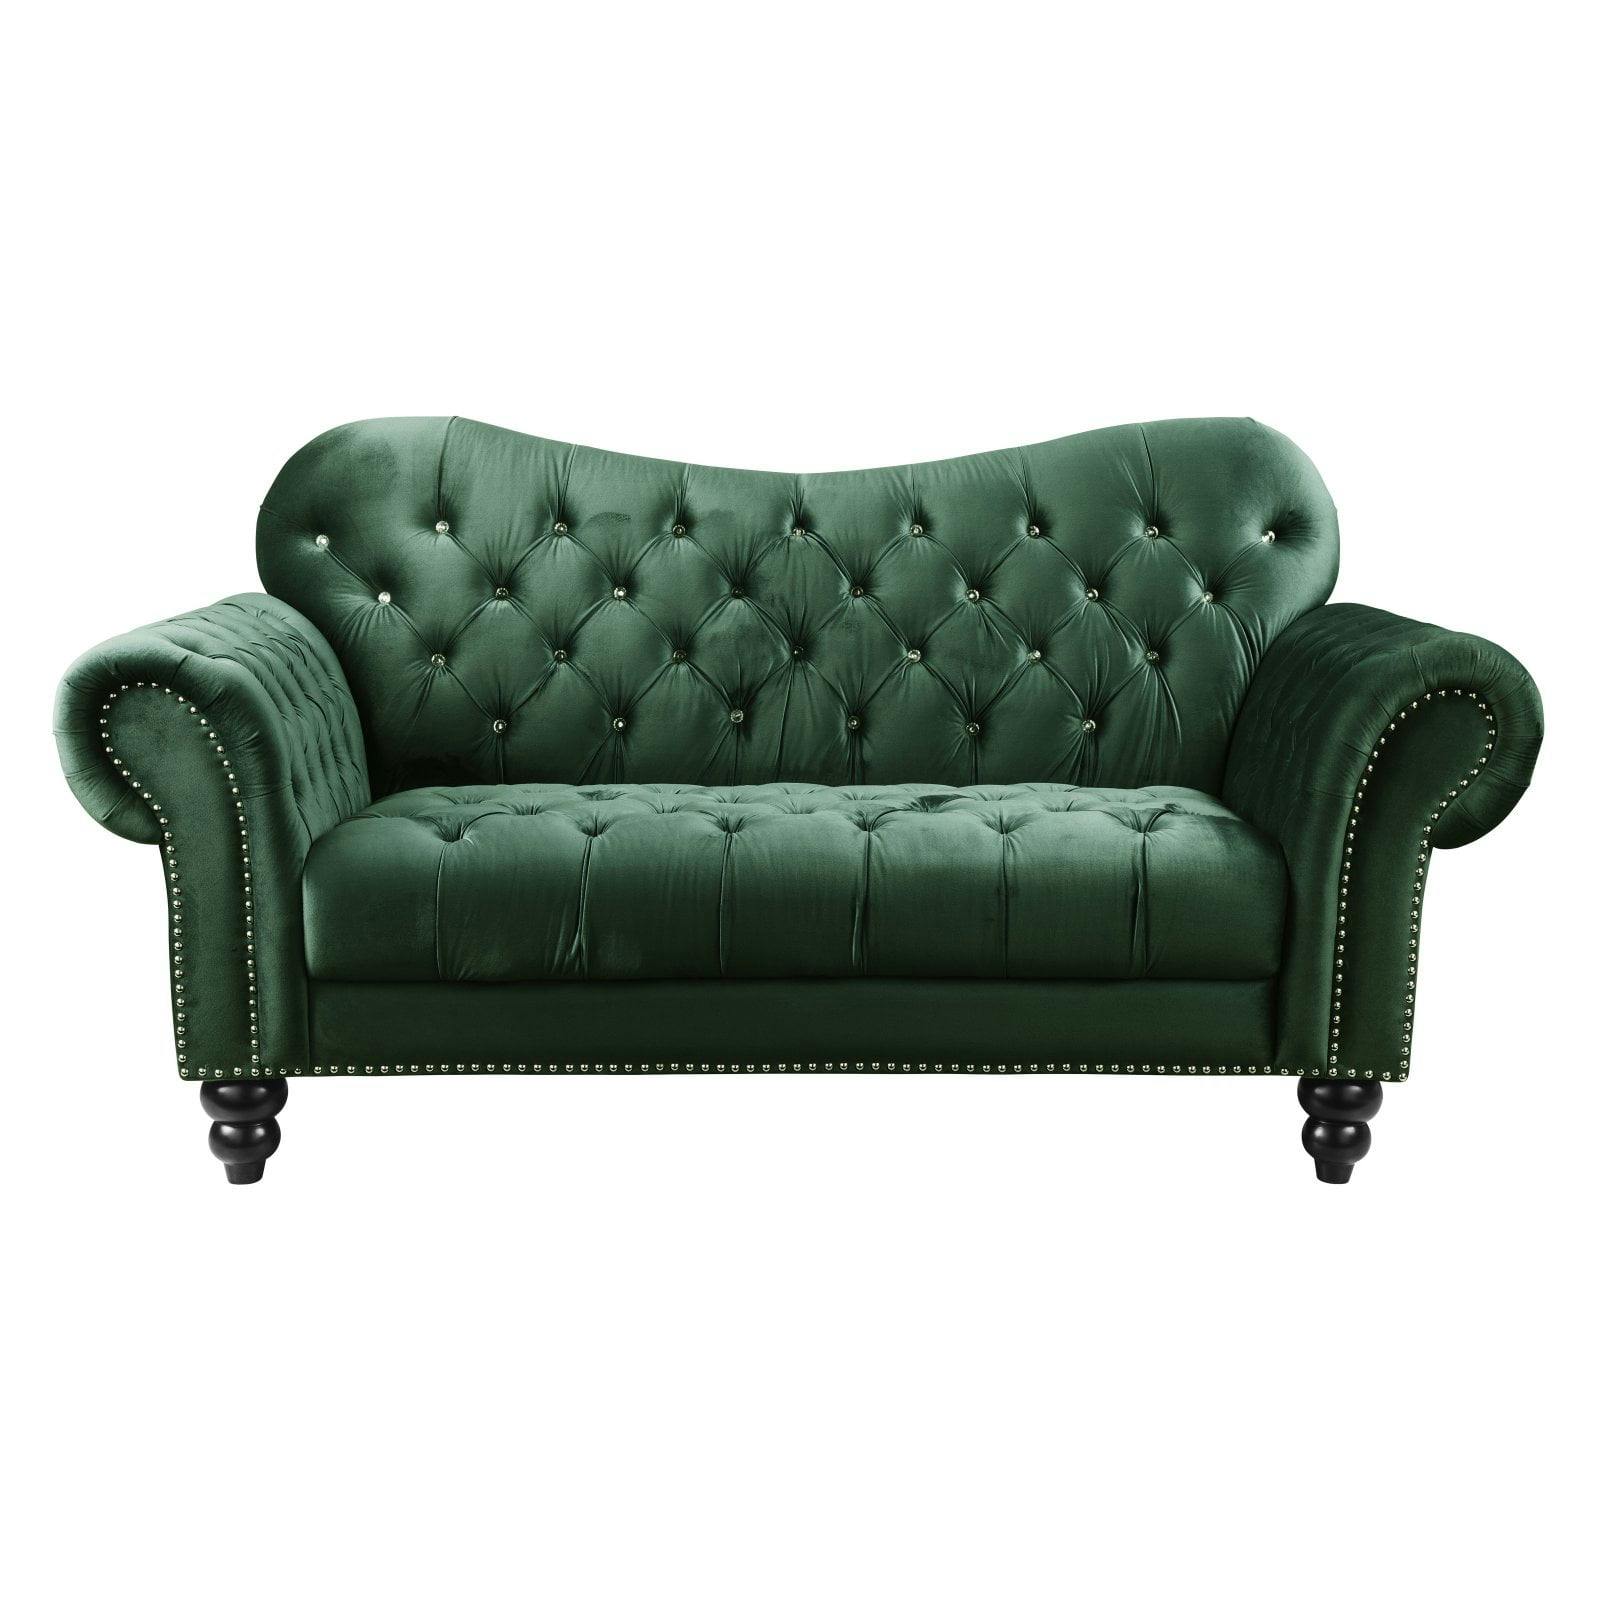 Elegant Blue Velvet Chesterfield Loveseat with Nailhead Trim and Rolled Arms